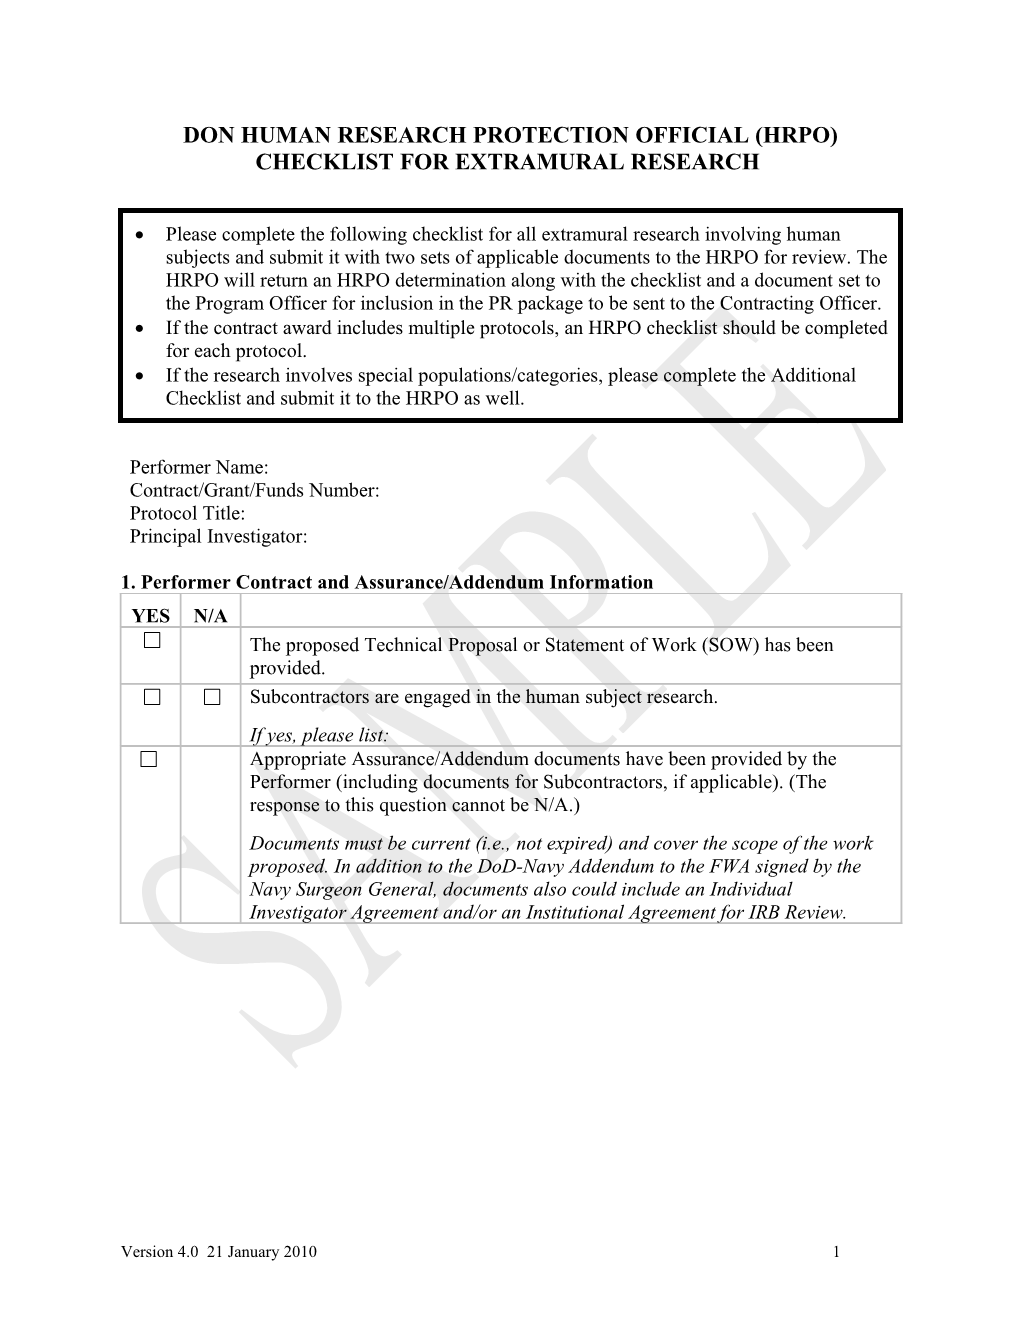 DON Human Research Protection Official (HRPO) Checklist for EXTRAMURAL RESEARCH